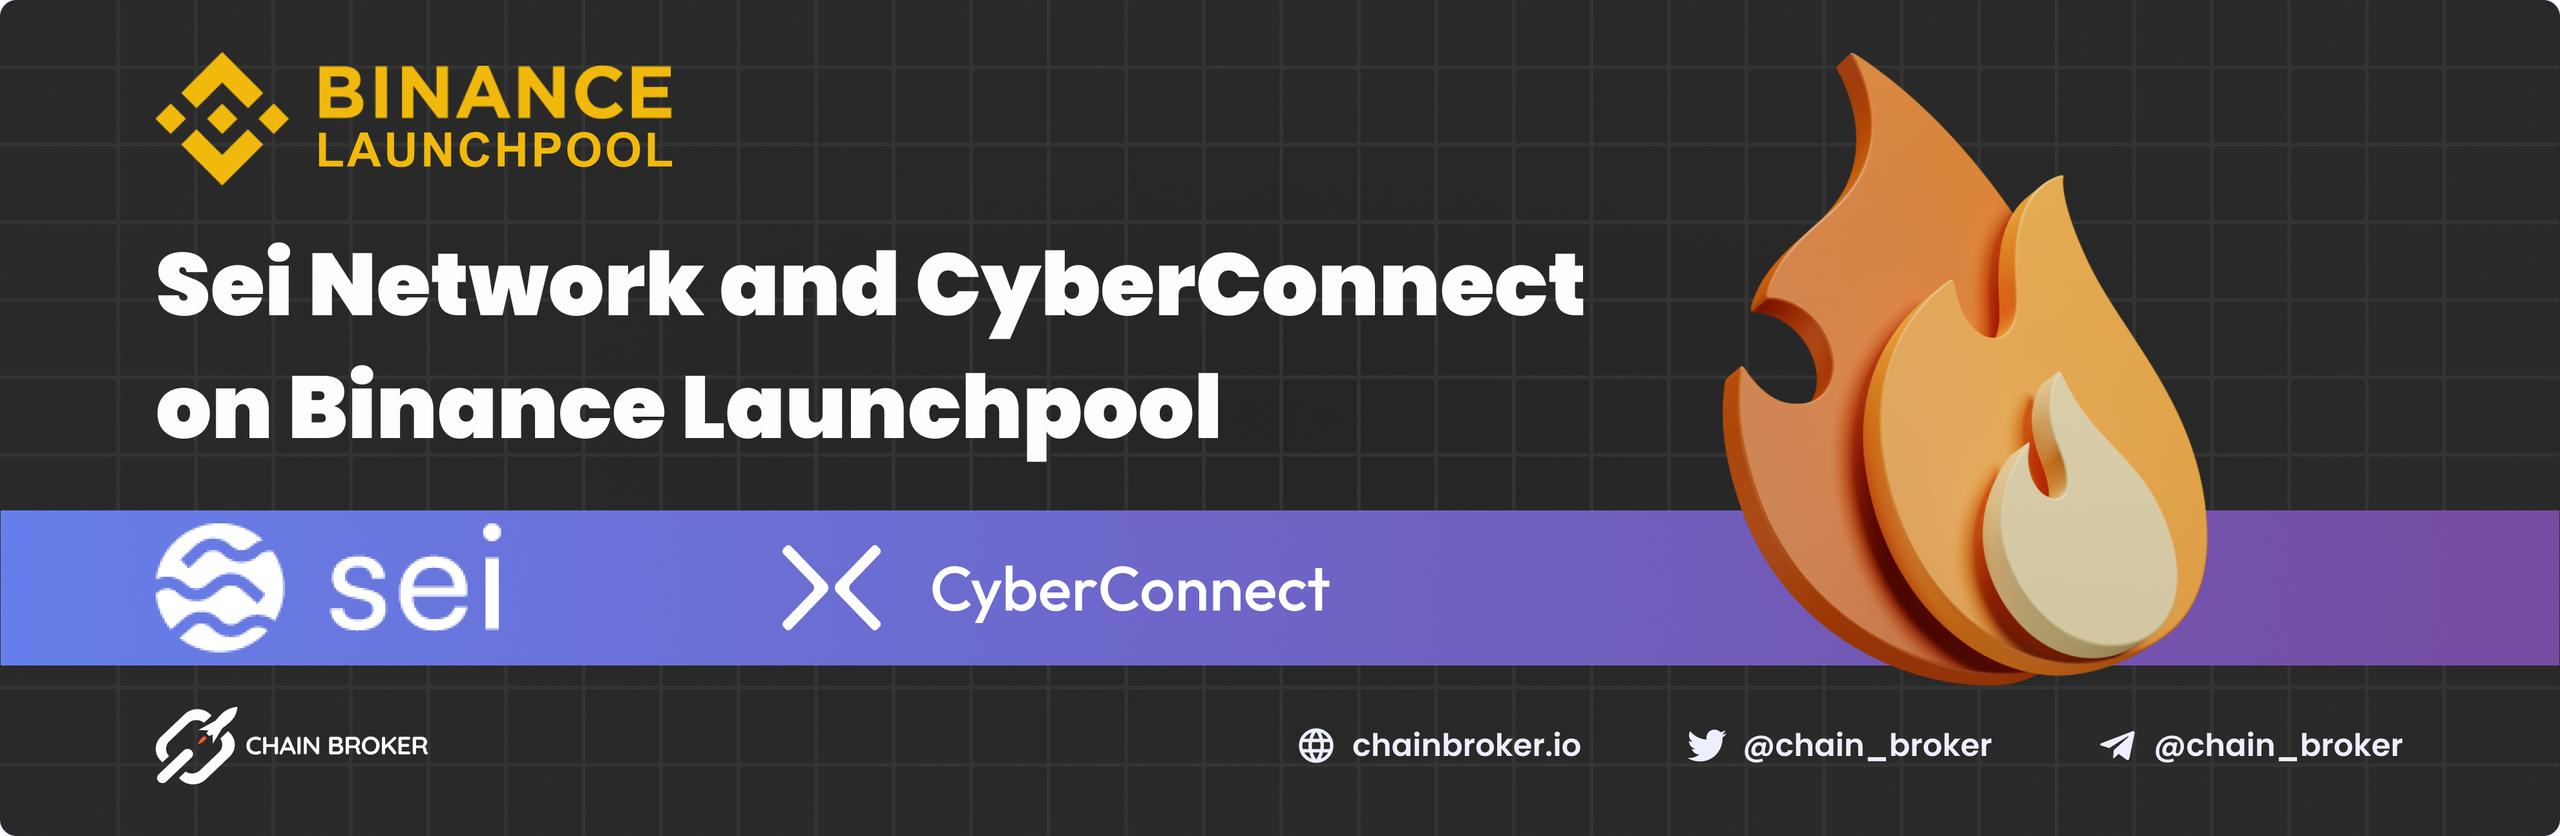 Sei Network and Cyberconnect to launch on Binance Launchpool